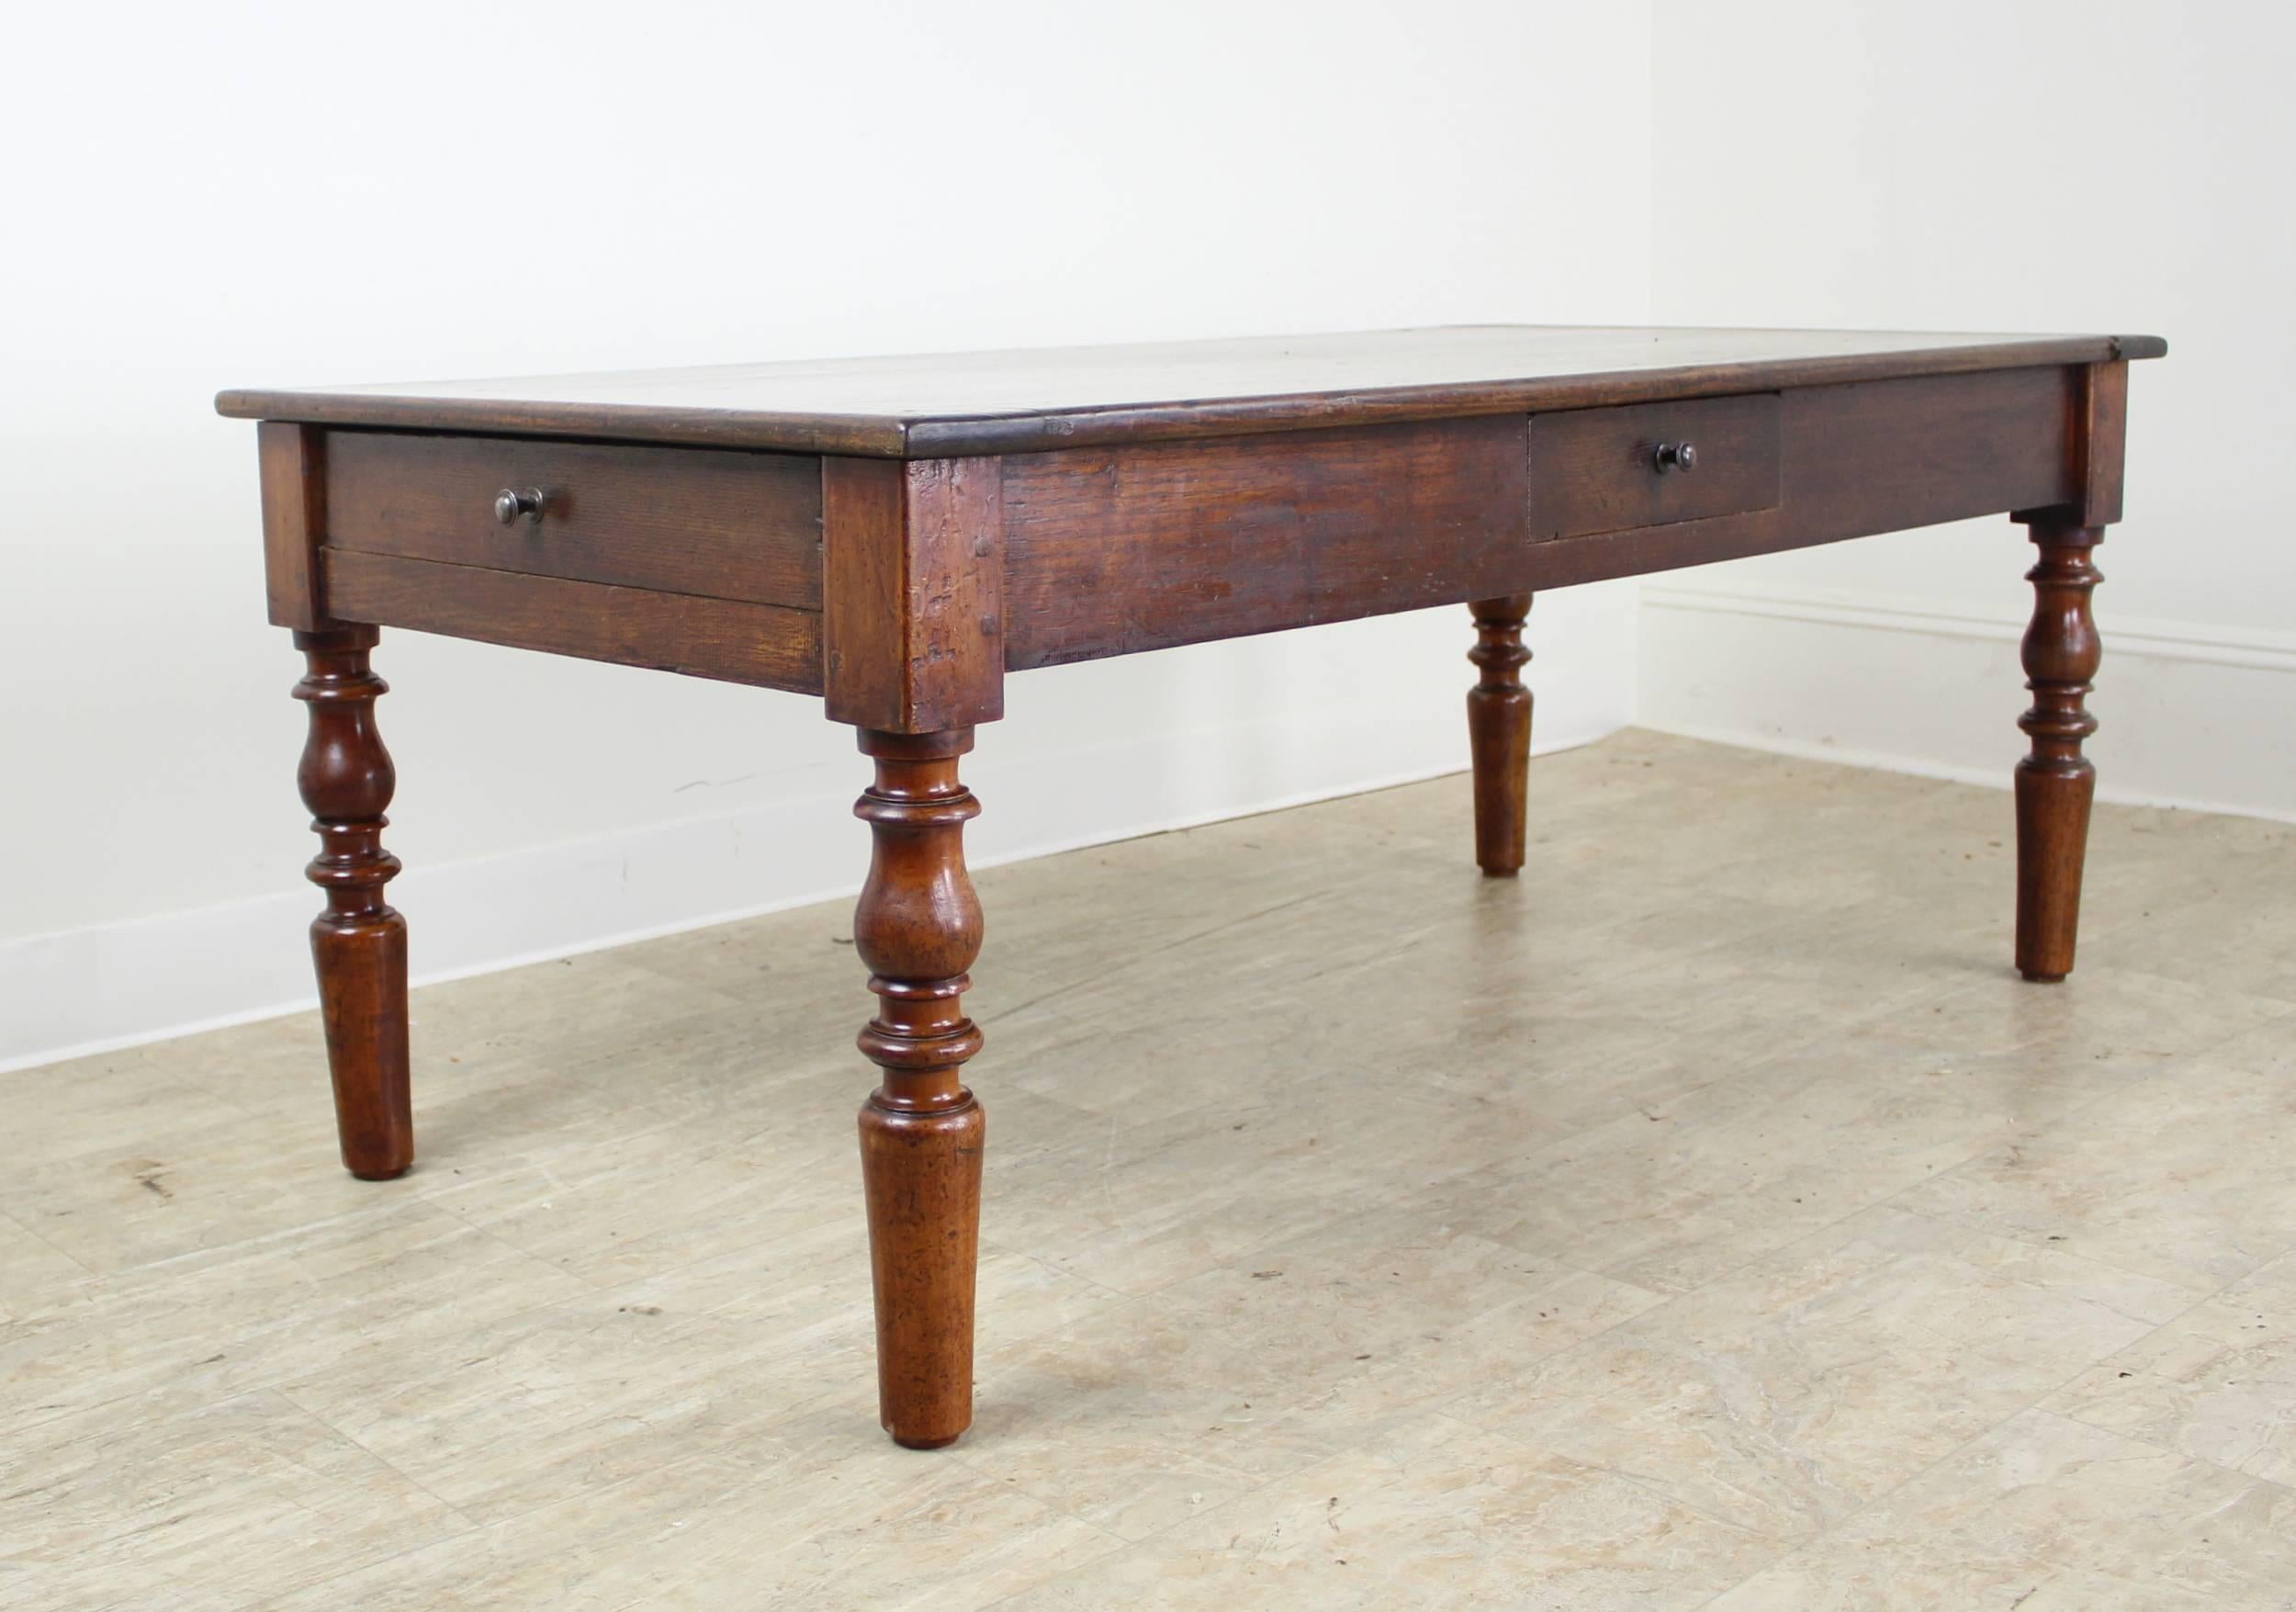 A handsome antique chestnut and fruitwood coffee table. This table boasts three drawers and a pull-out serving shelf, originally a bread slide. The chunky turned legs lend a charming design note. Breadboard ends on the top accent the richly grained